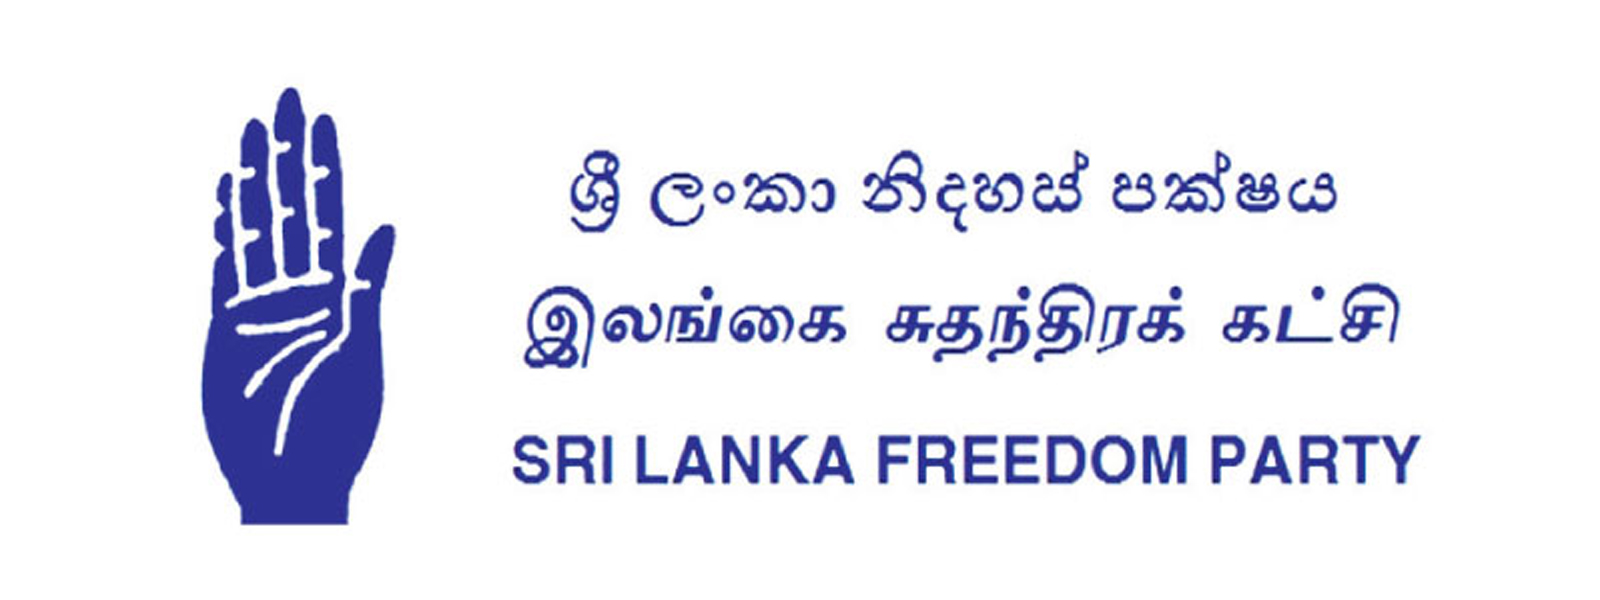 Two committees appointed to restructure SLFP 